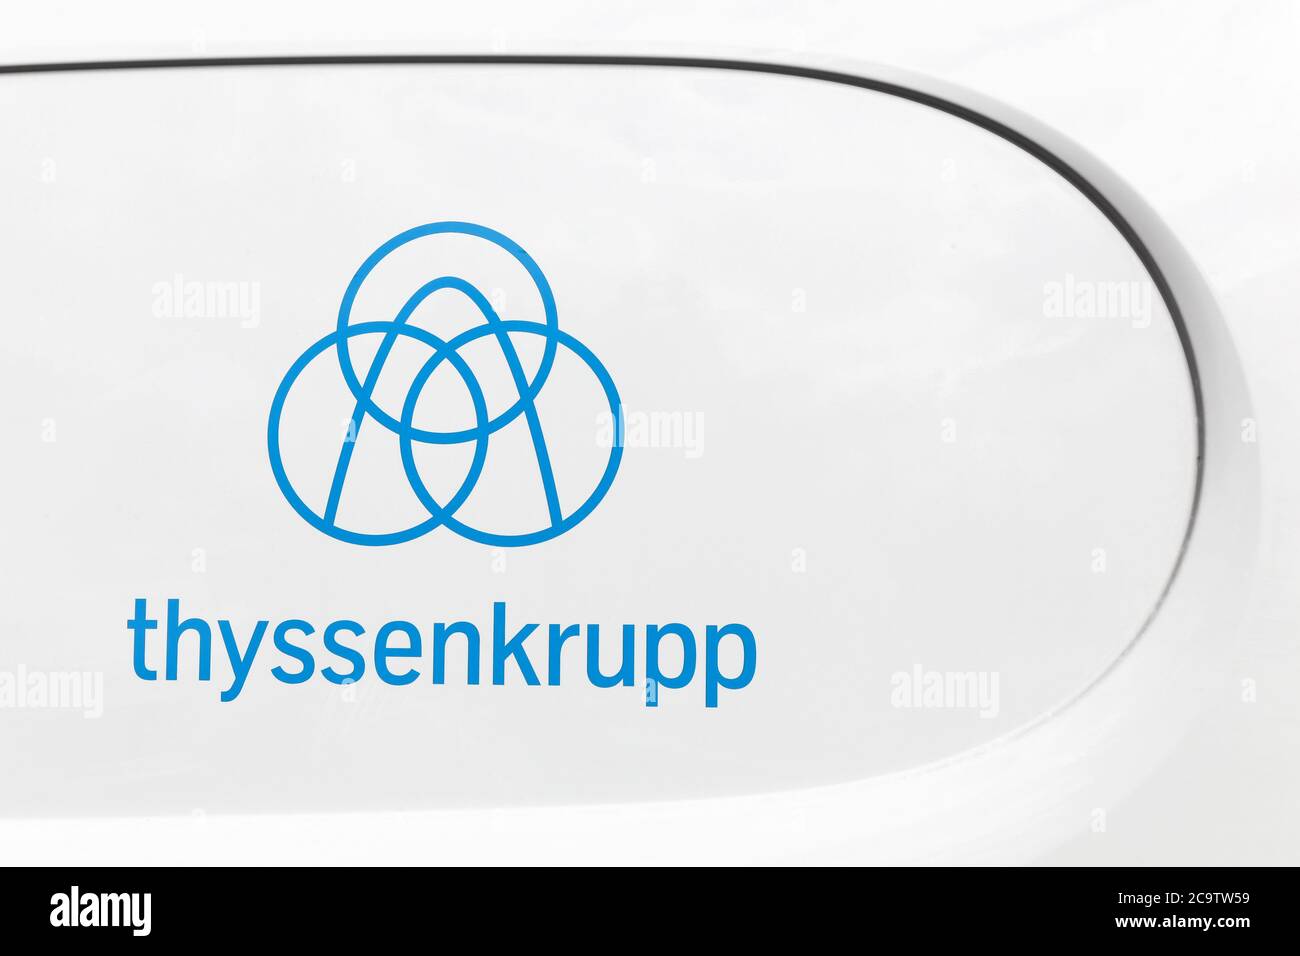 Villefranche, France - June 20, 20120: Thyssenkrupp logo on a car. Thyssenkrupp is a German multinational conglomerate Stock Photo